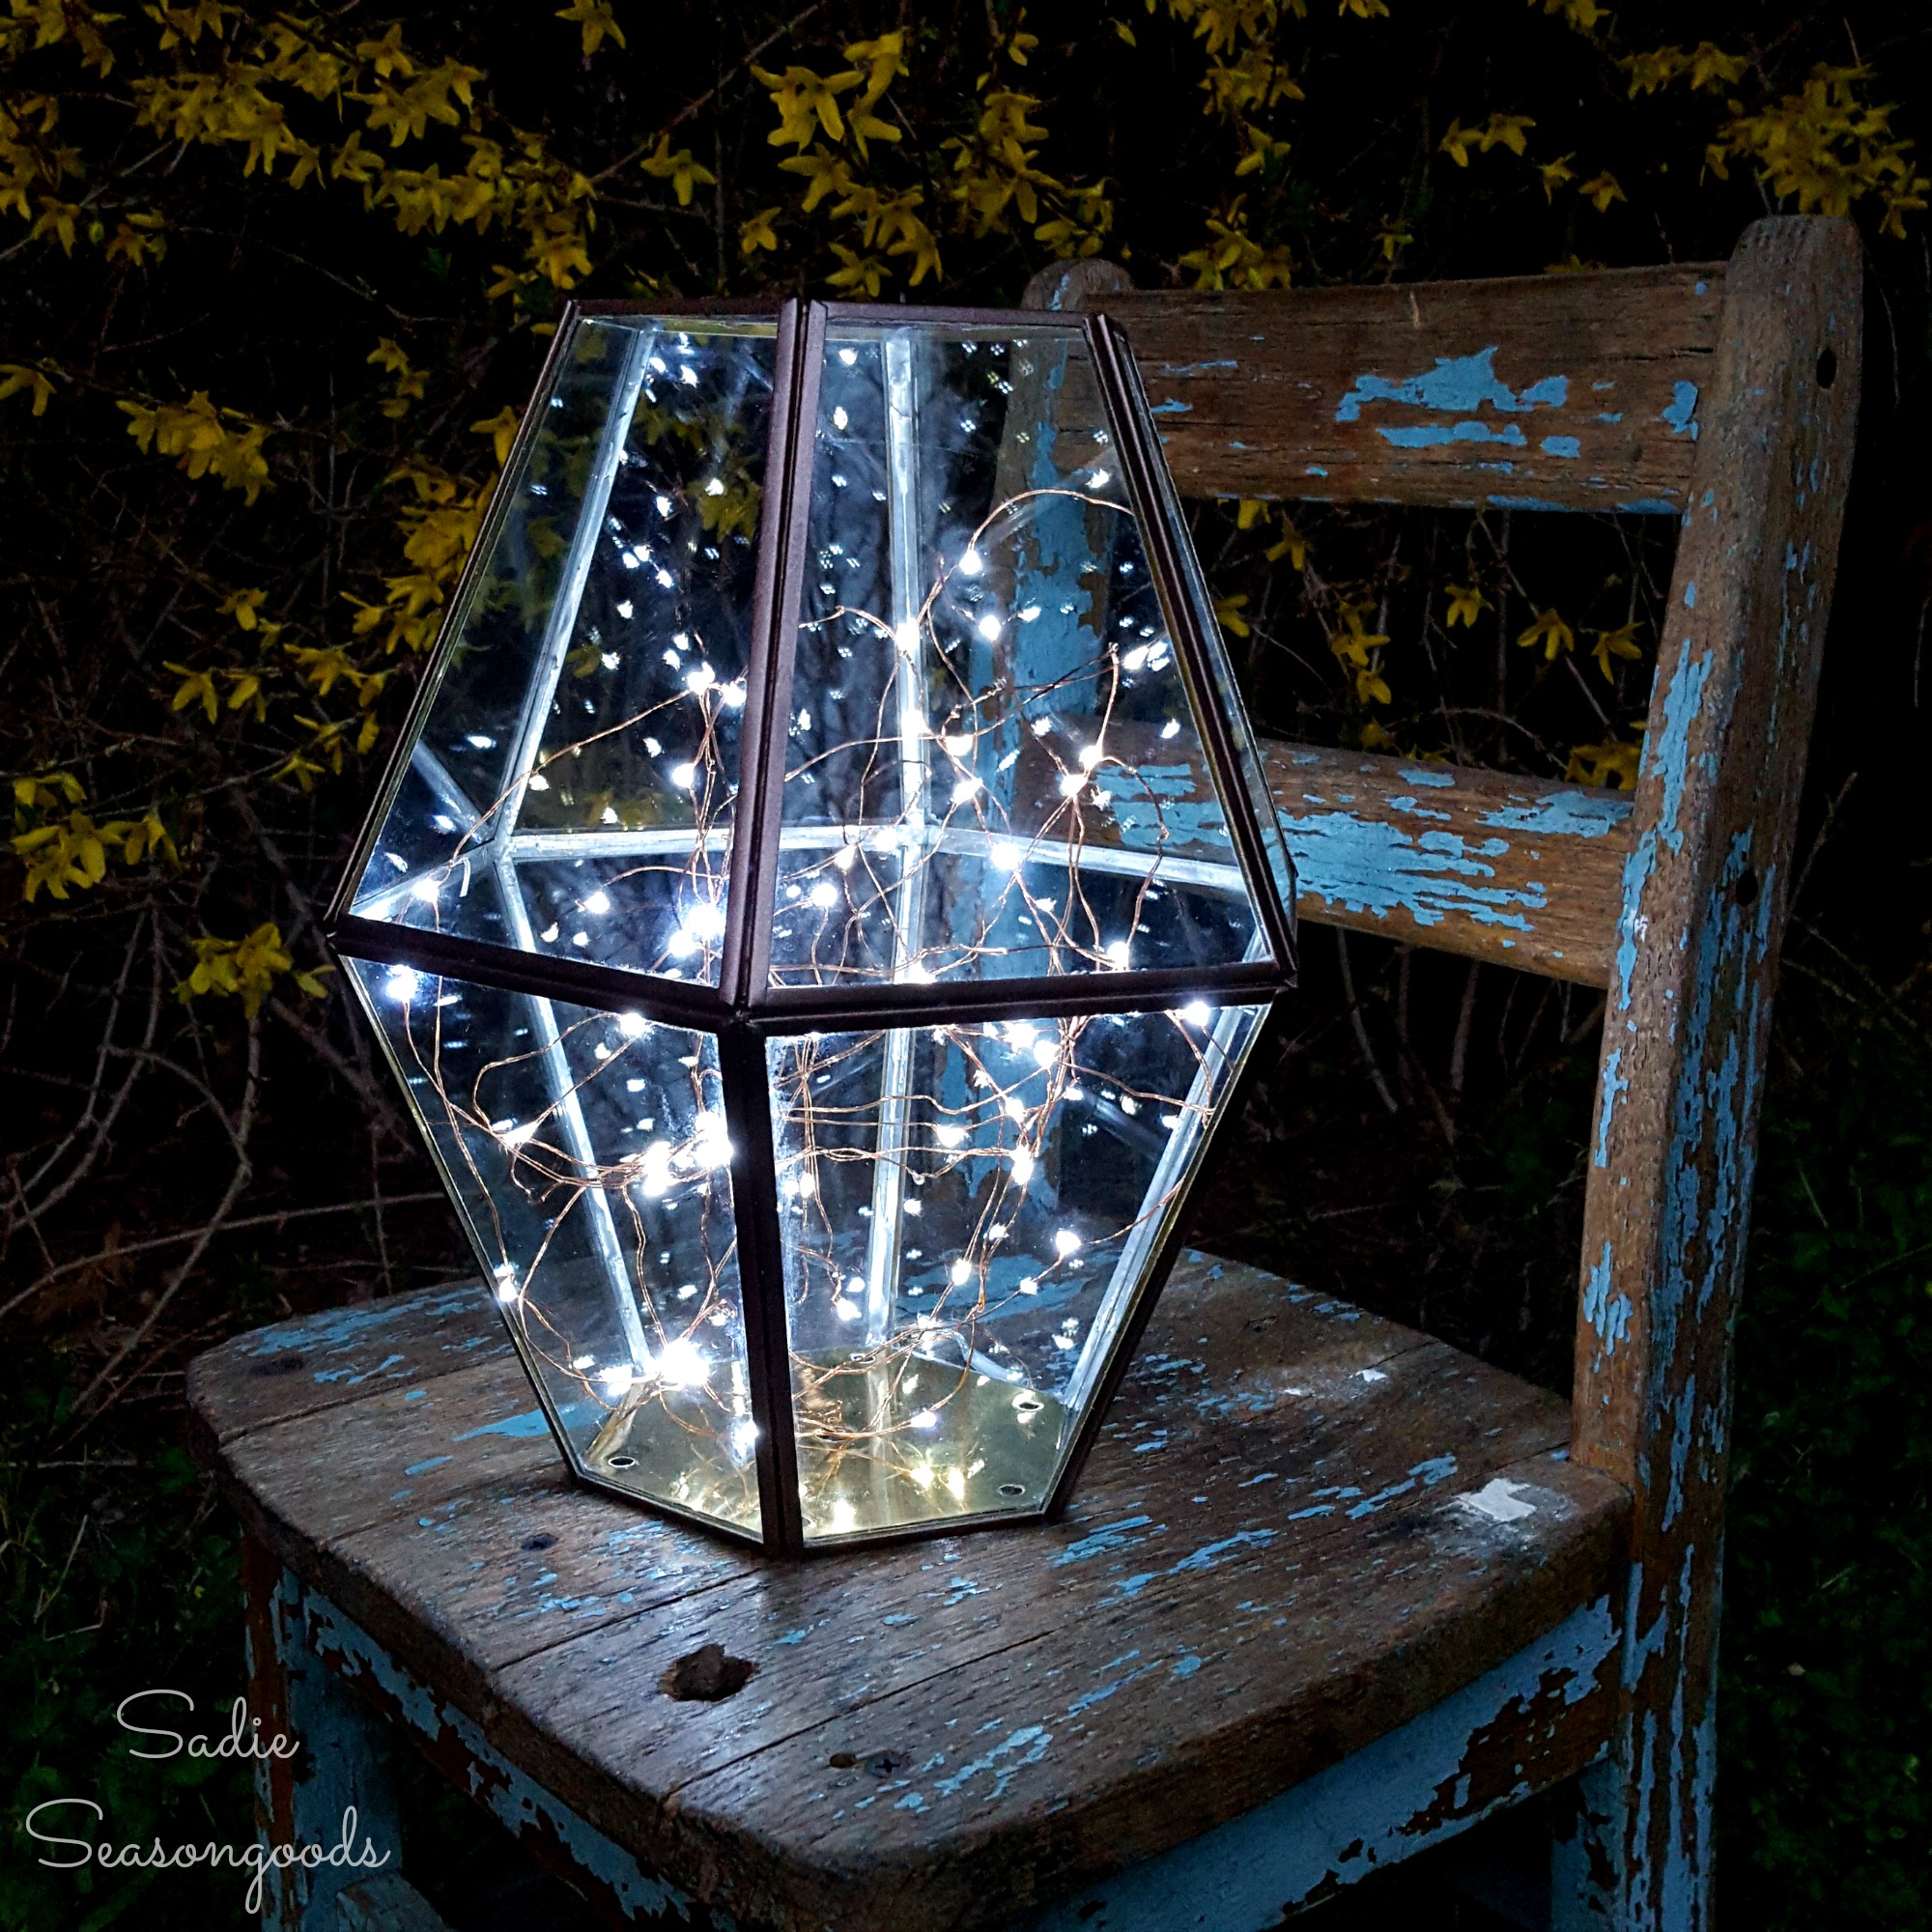 These 10 creative outdoor lighting ideas are sure to spark some inspiration into lighting up your own patio or deck! www.theweatheredfox.net